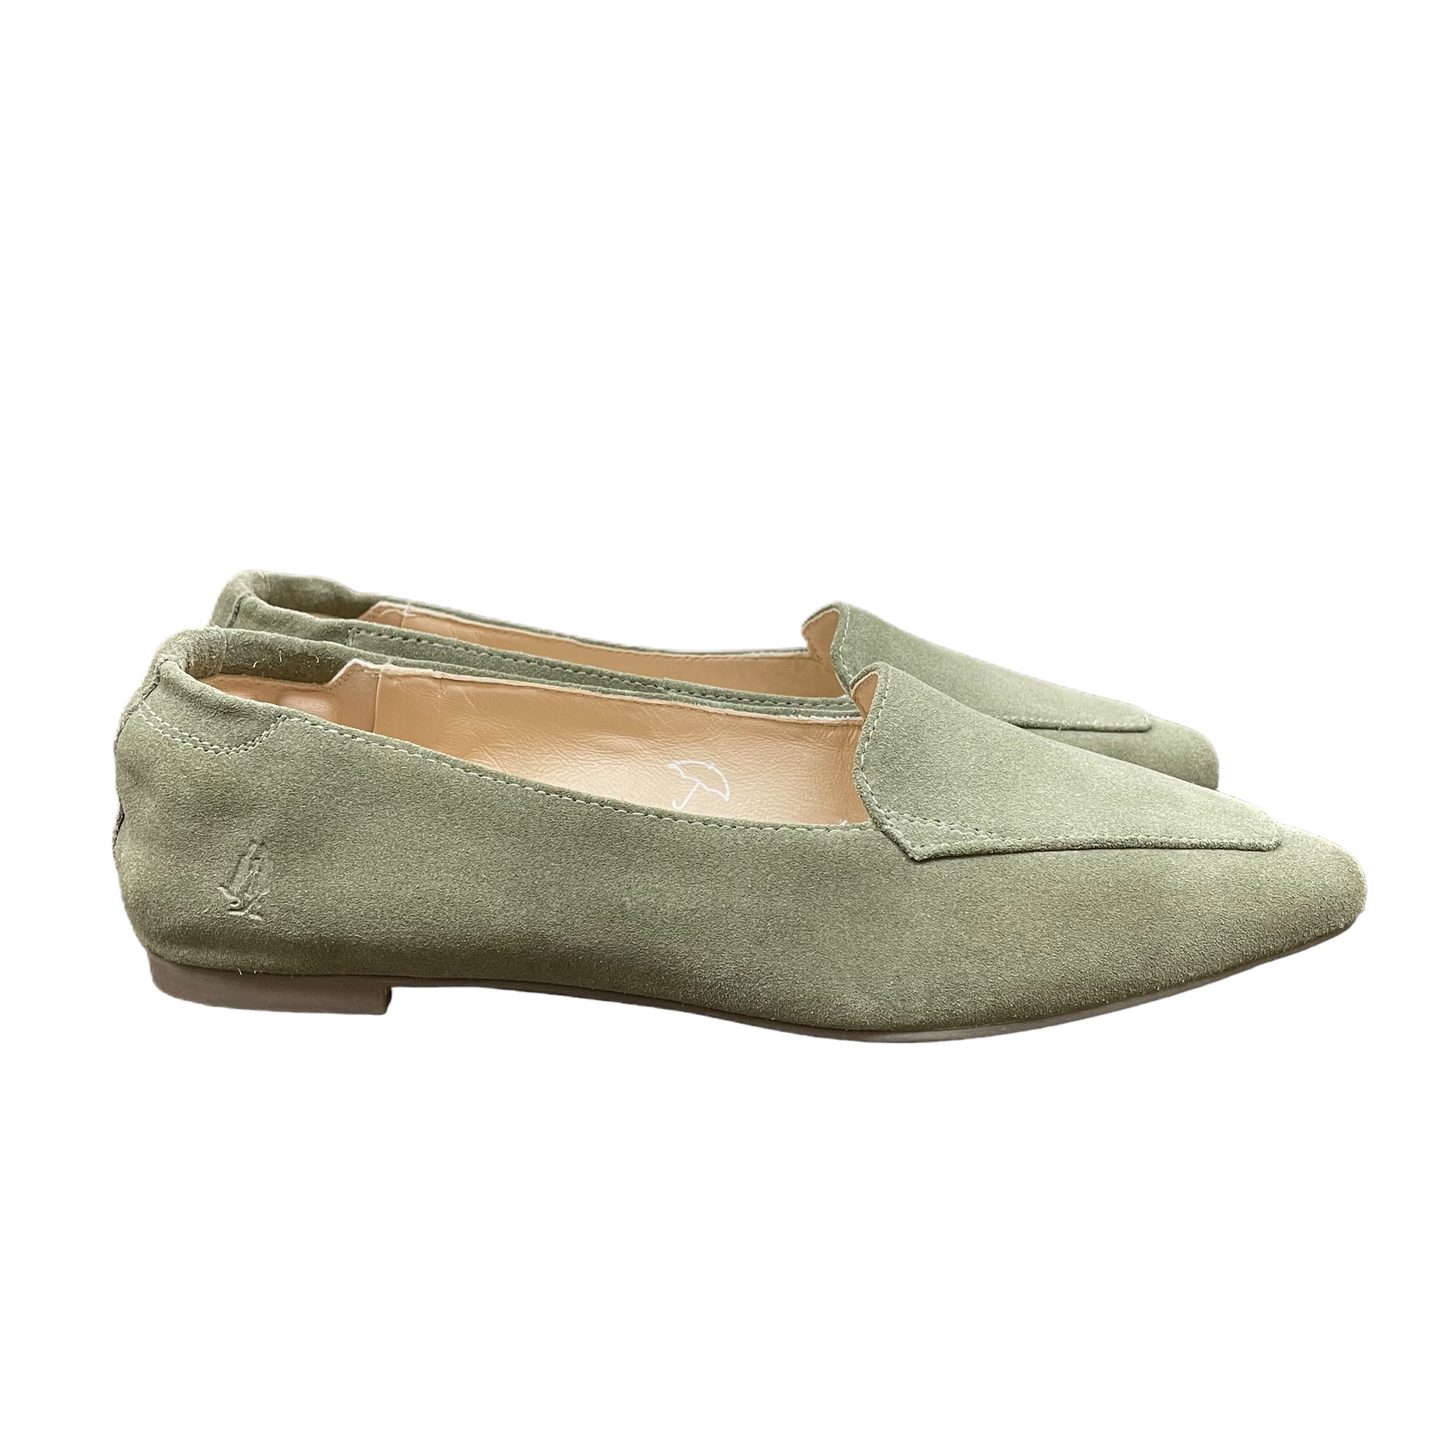 Green Shoes Flats By Hush Puppies, Size: 7